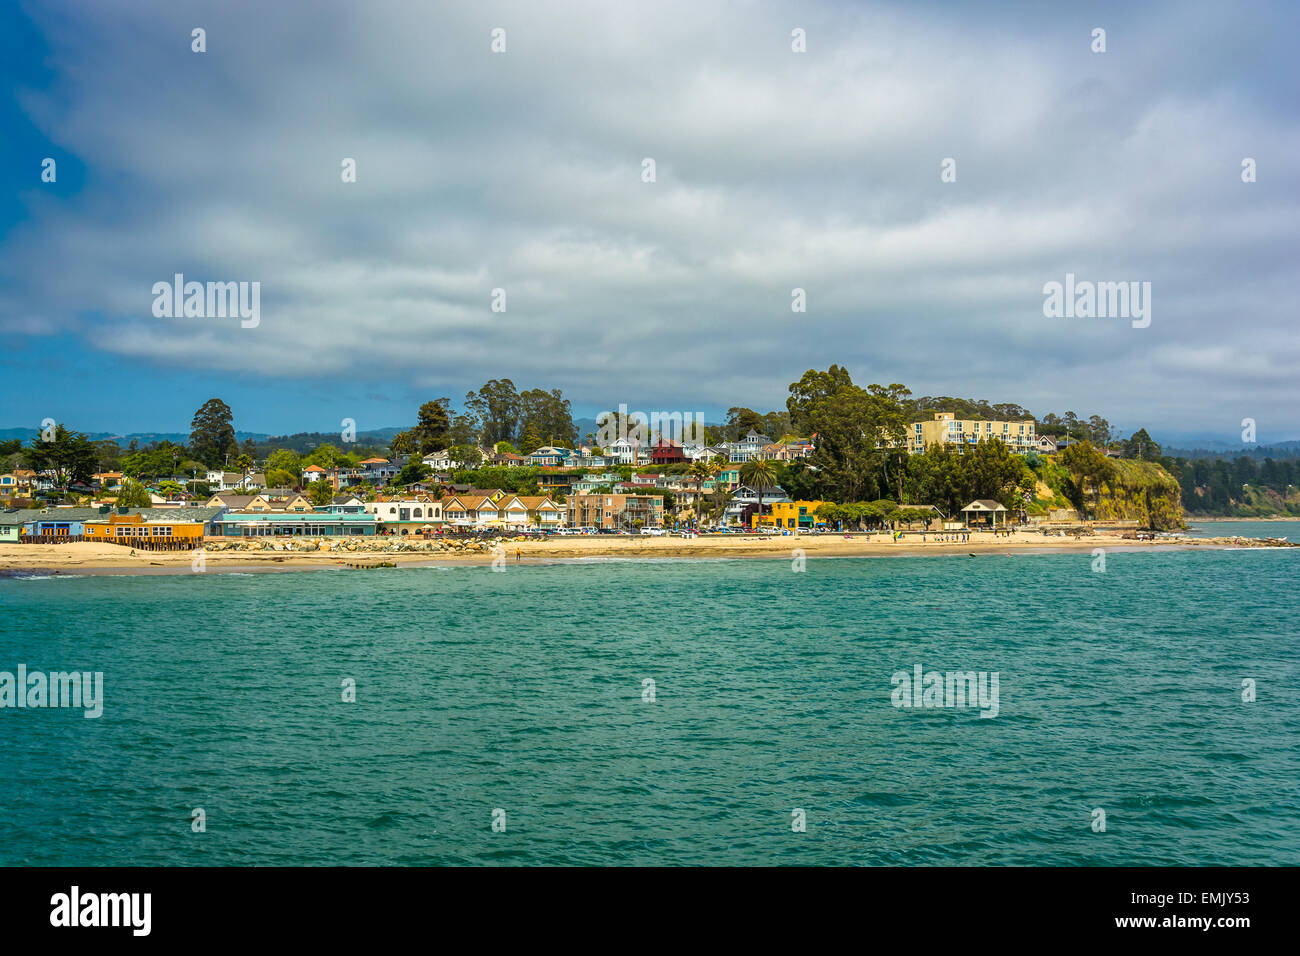 View of the beach in Capitola, California. Stock Photo